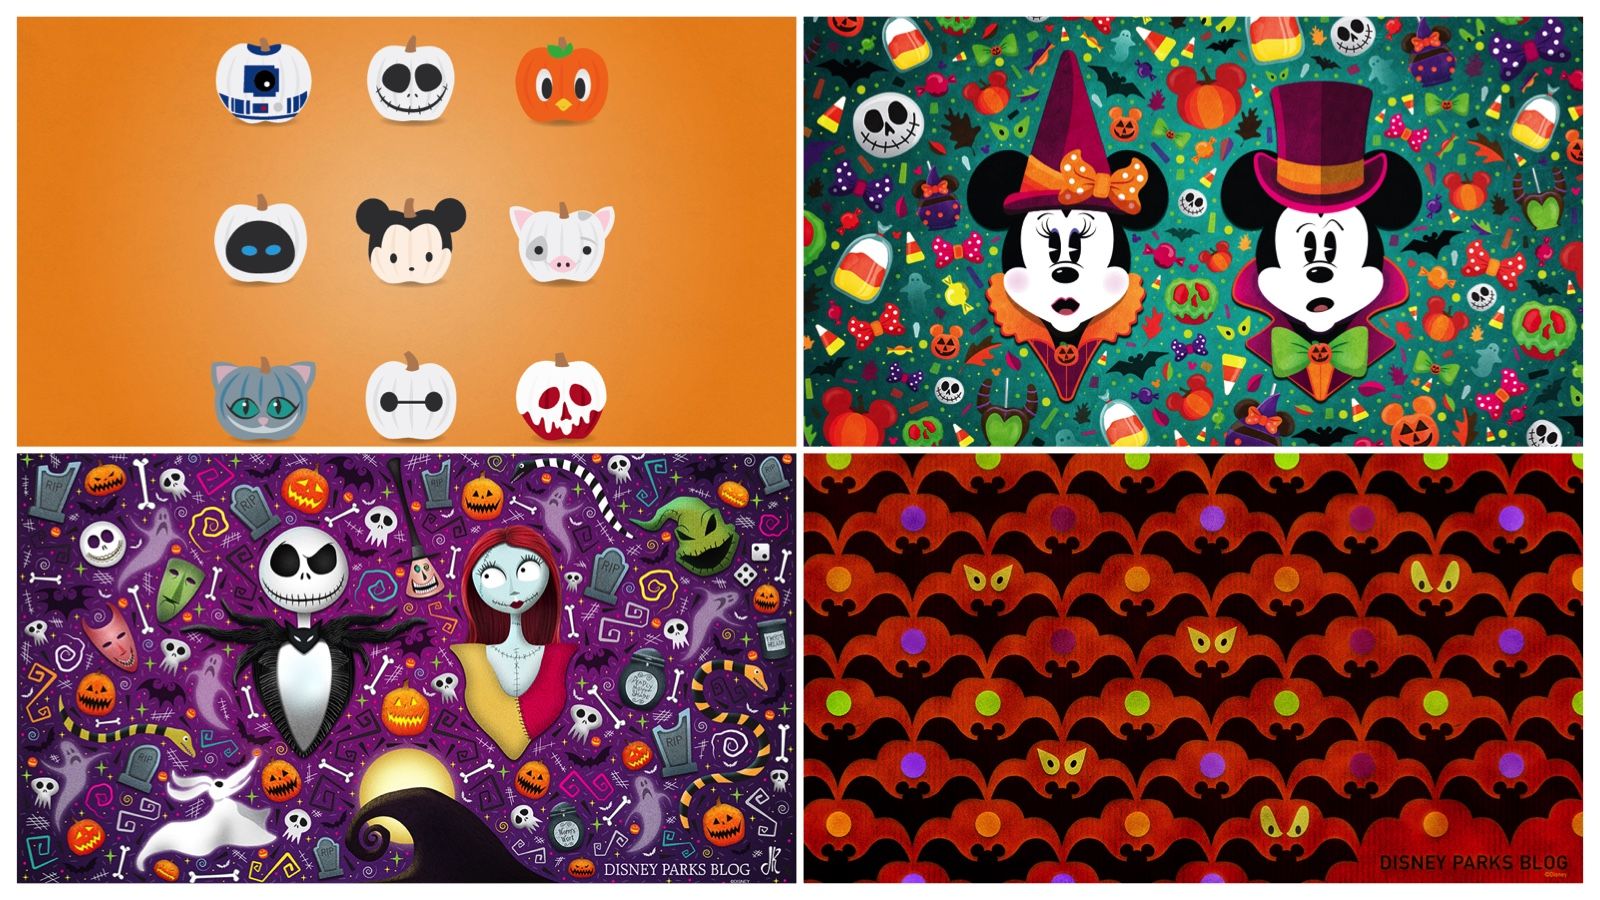 Frighten Up Your Device With 15 Halloween Digital Wallpaper. Disney Parks Blog